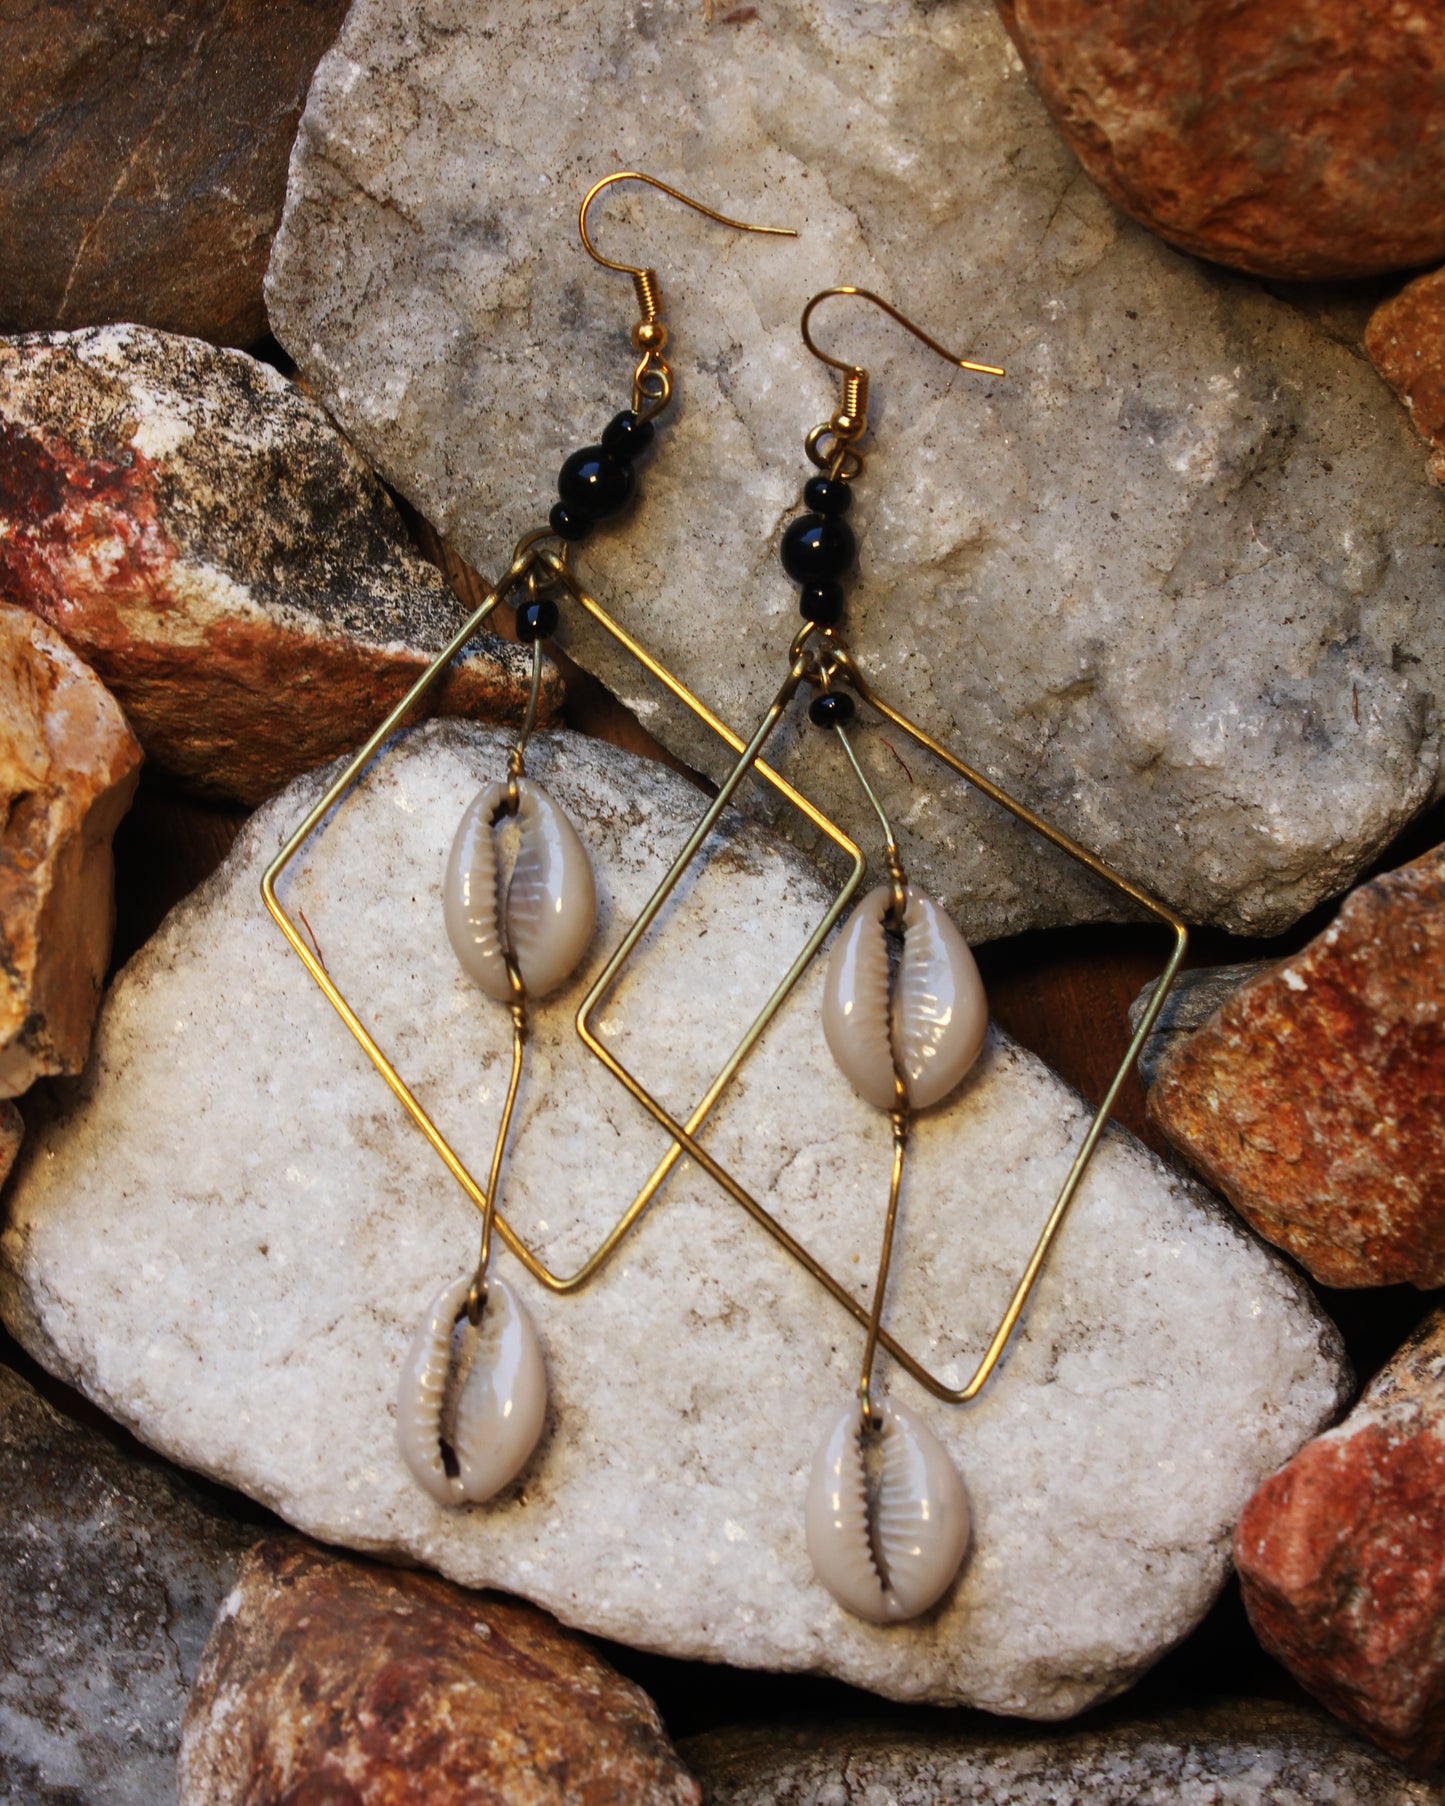 Brass Diamond-shaped earrings with a Cowry Shell Pendant and Black Beads